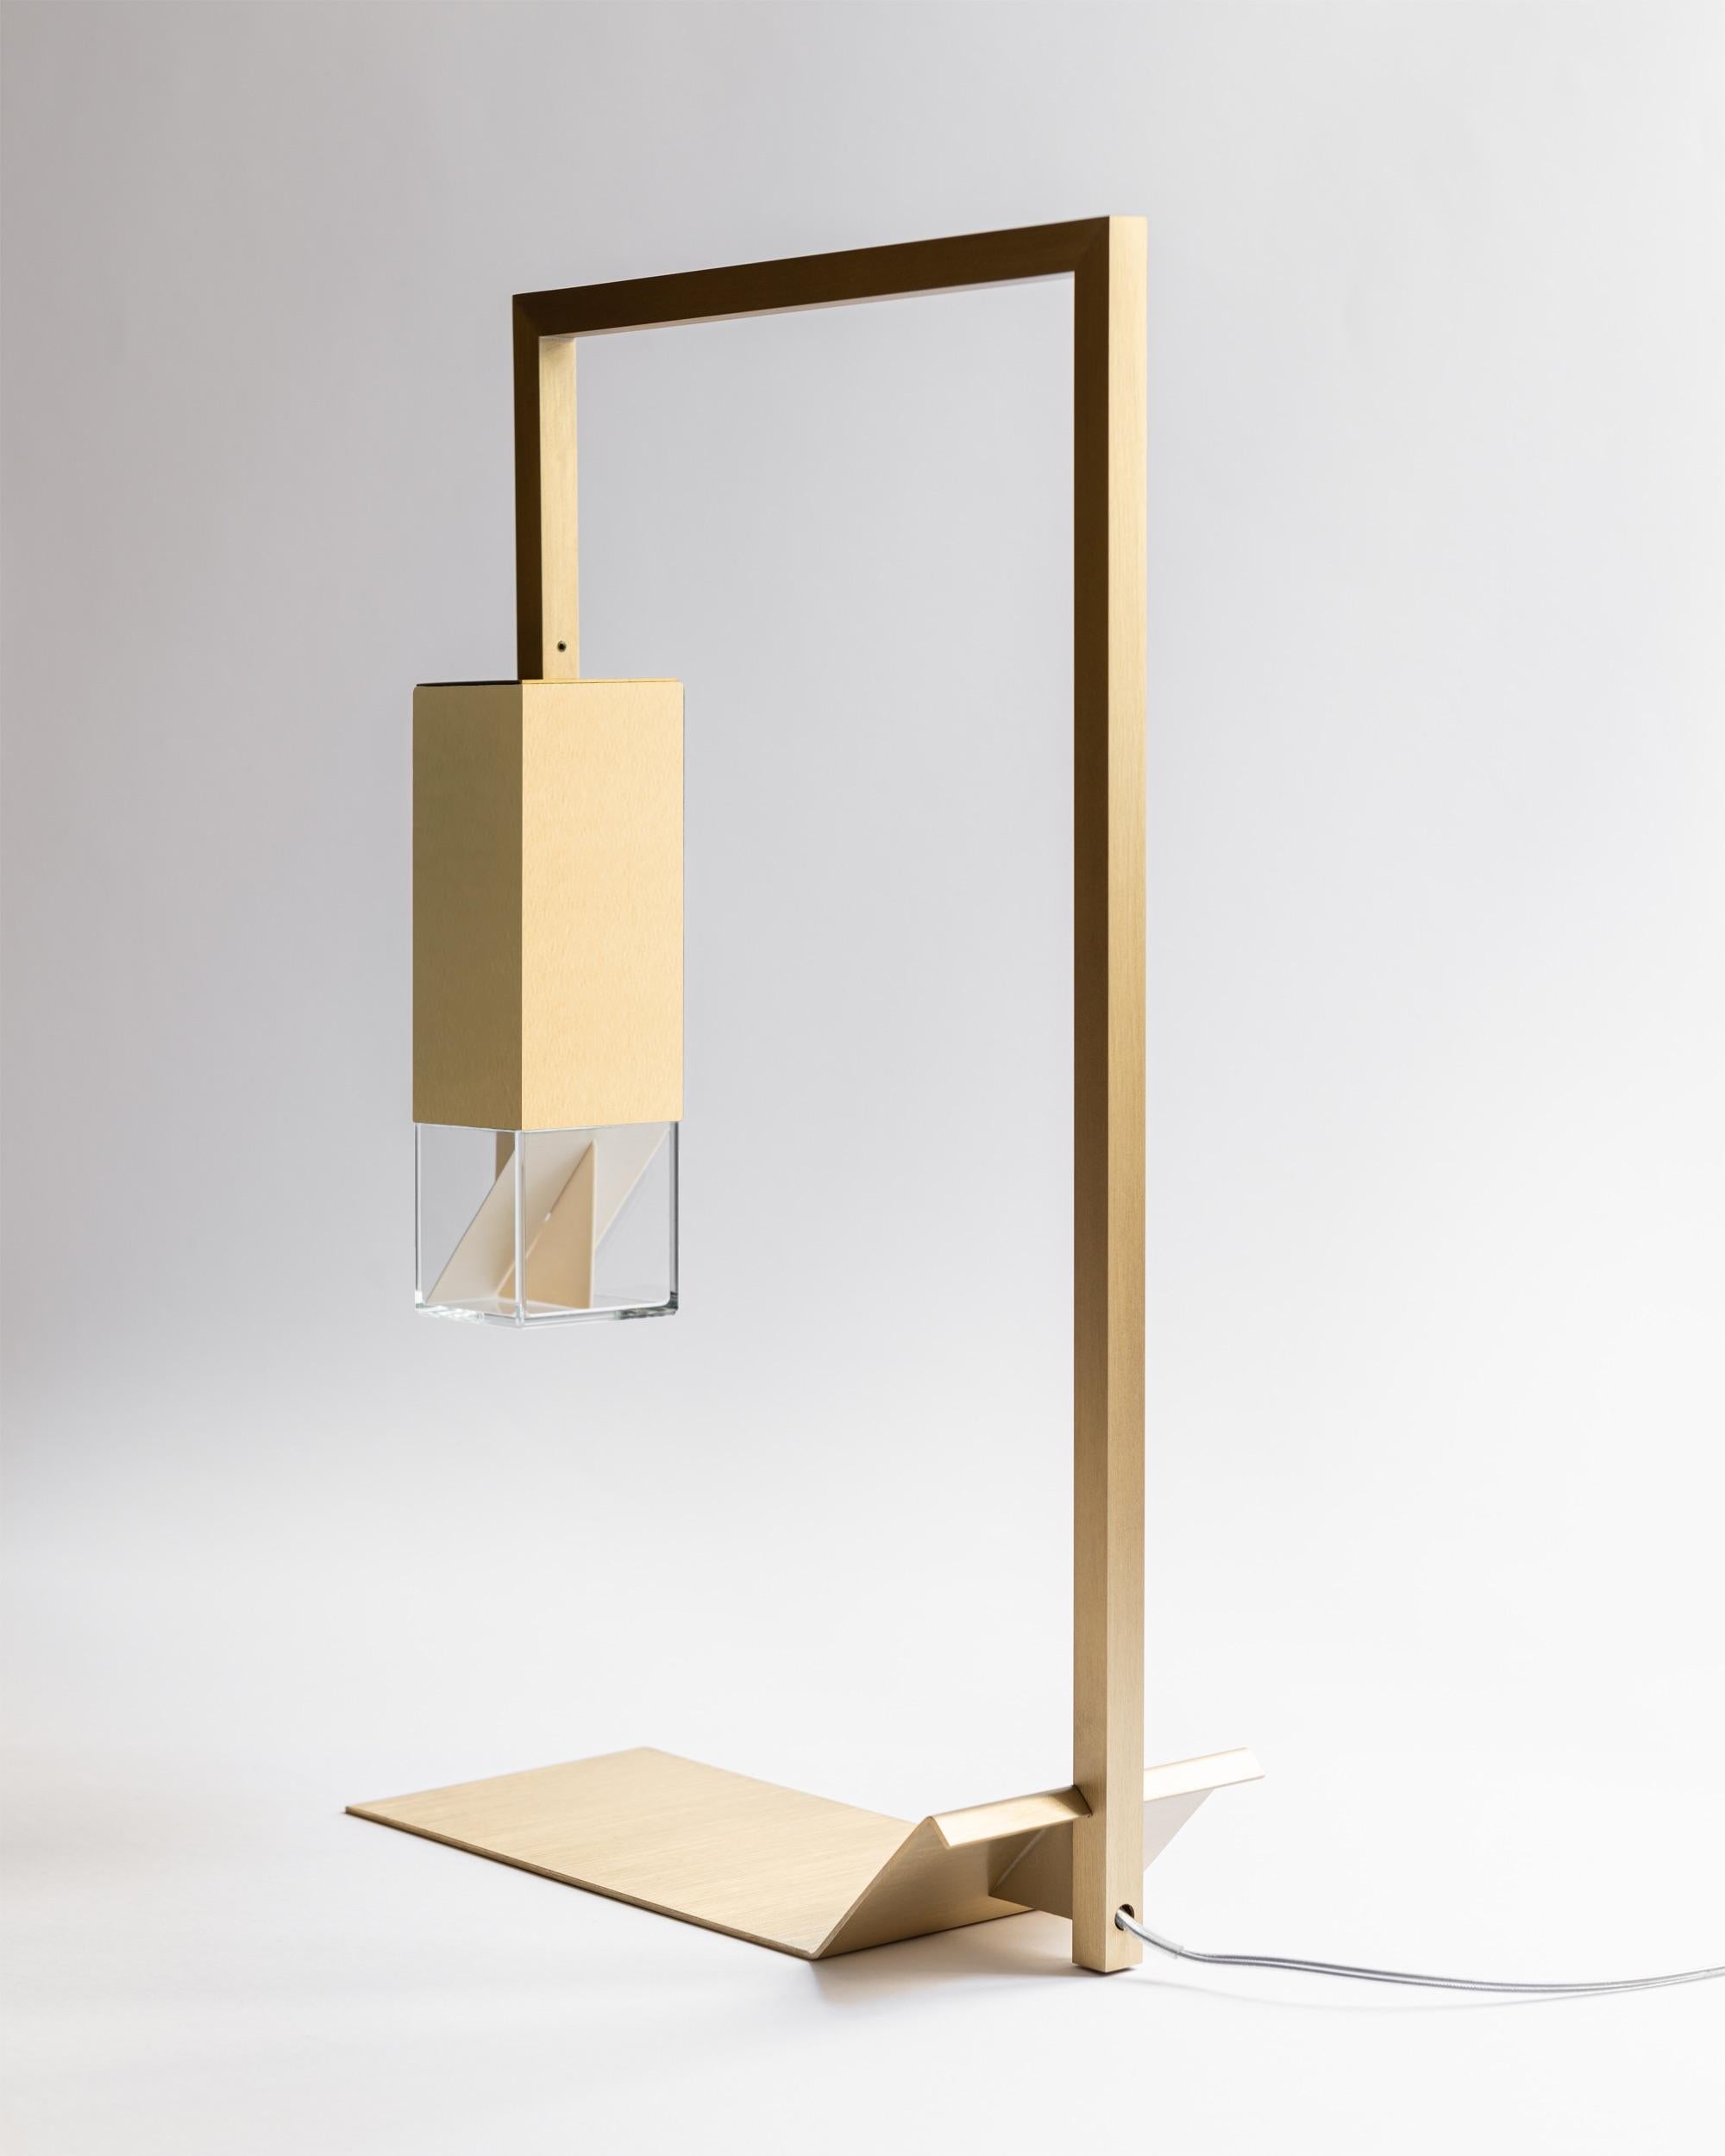 About
Modern Minimalist Handmade Brass Table Lamp by Formaminima

Lamp/Two Brass
Design by Formaminima
Table Light
Materials:
Body lamp handcrafted in solid brass golden satin finish / crystal glass diffuser hosting Limoges biscuit-finish porcelain